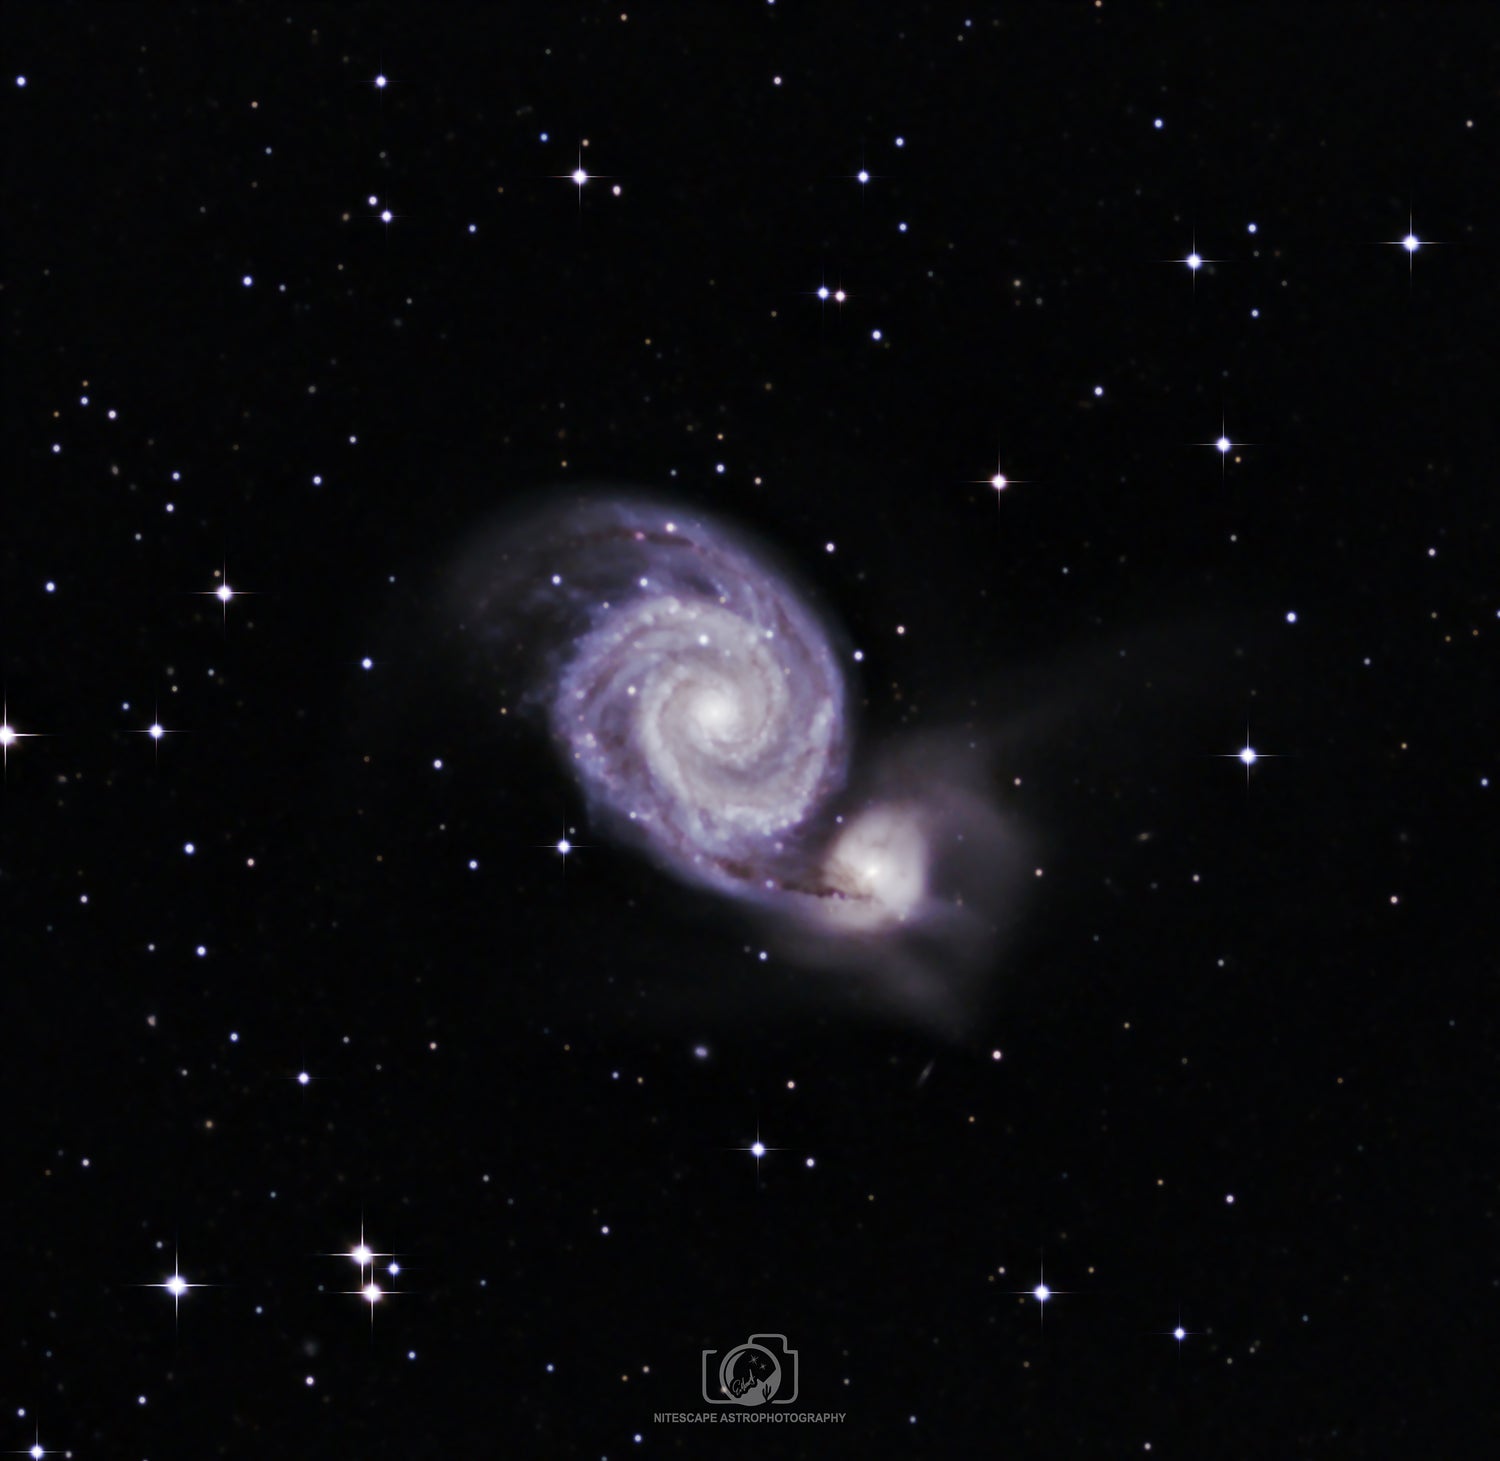 Why should I buy metal print wall art of the Whirlpool Galaxy